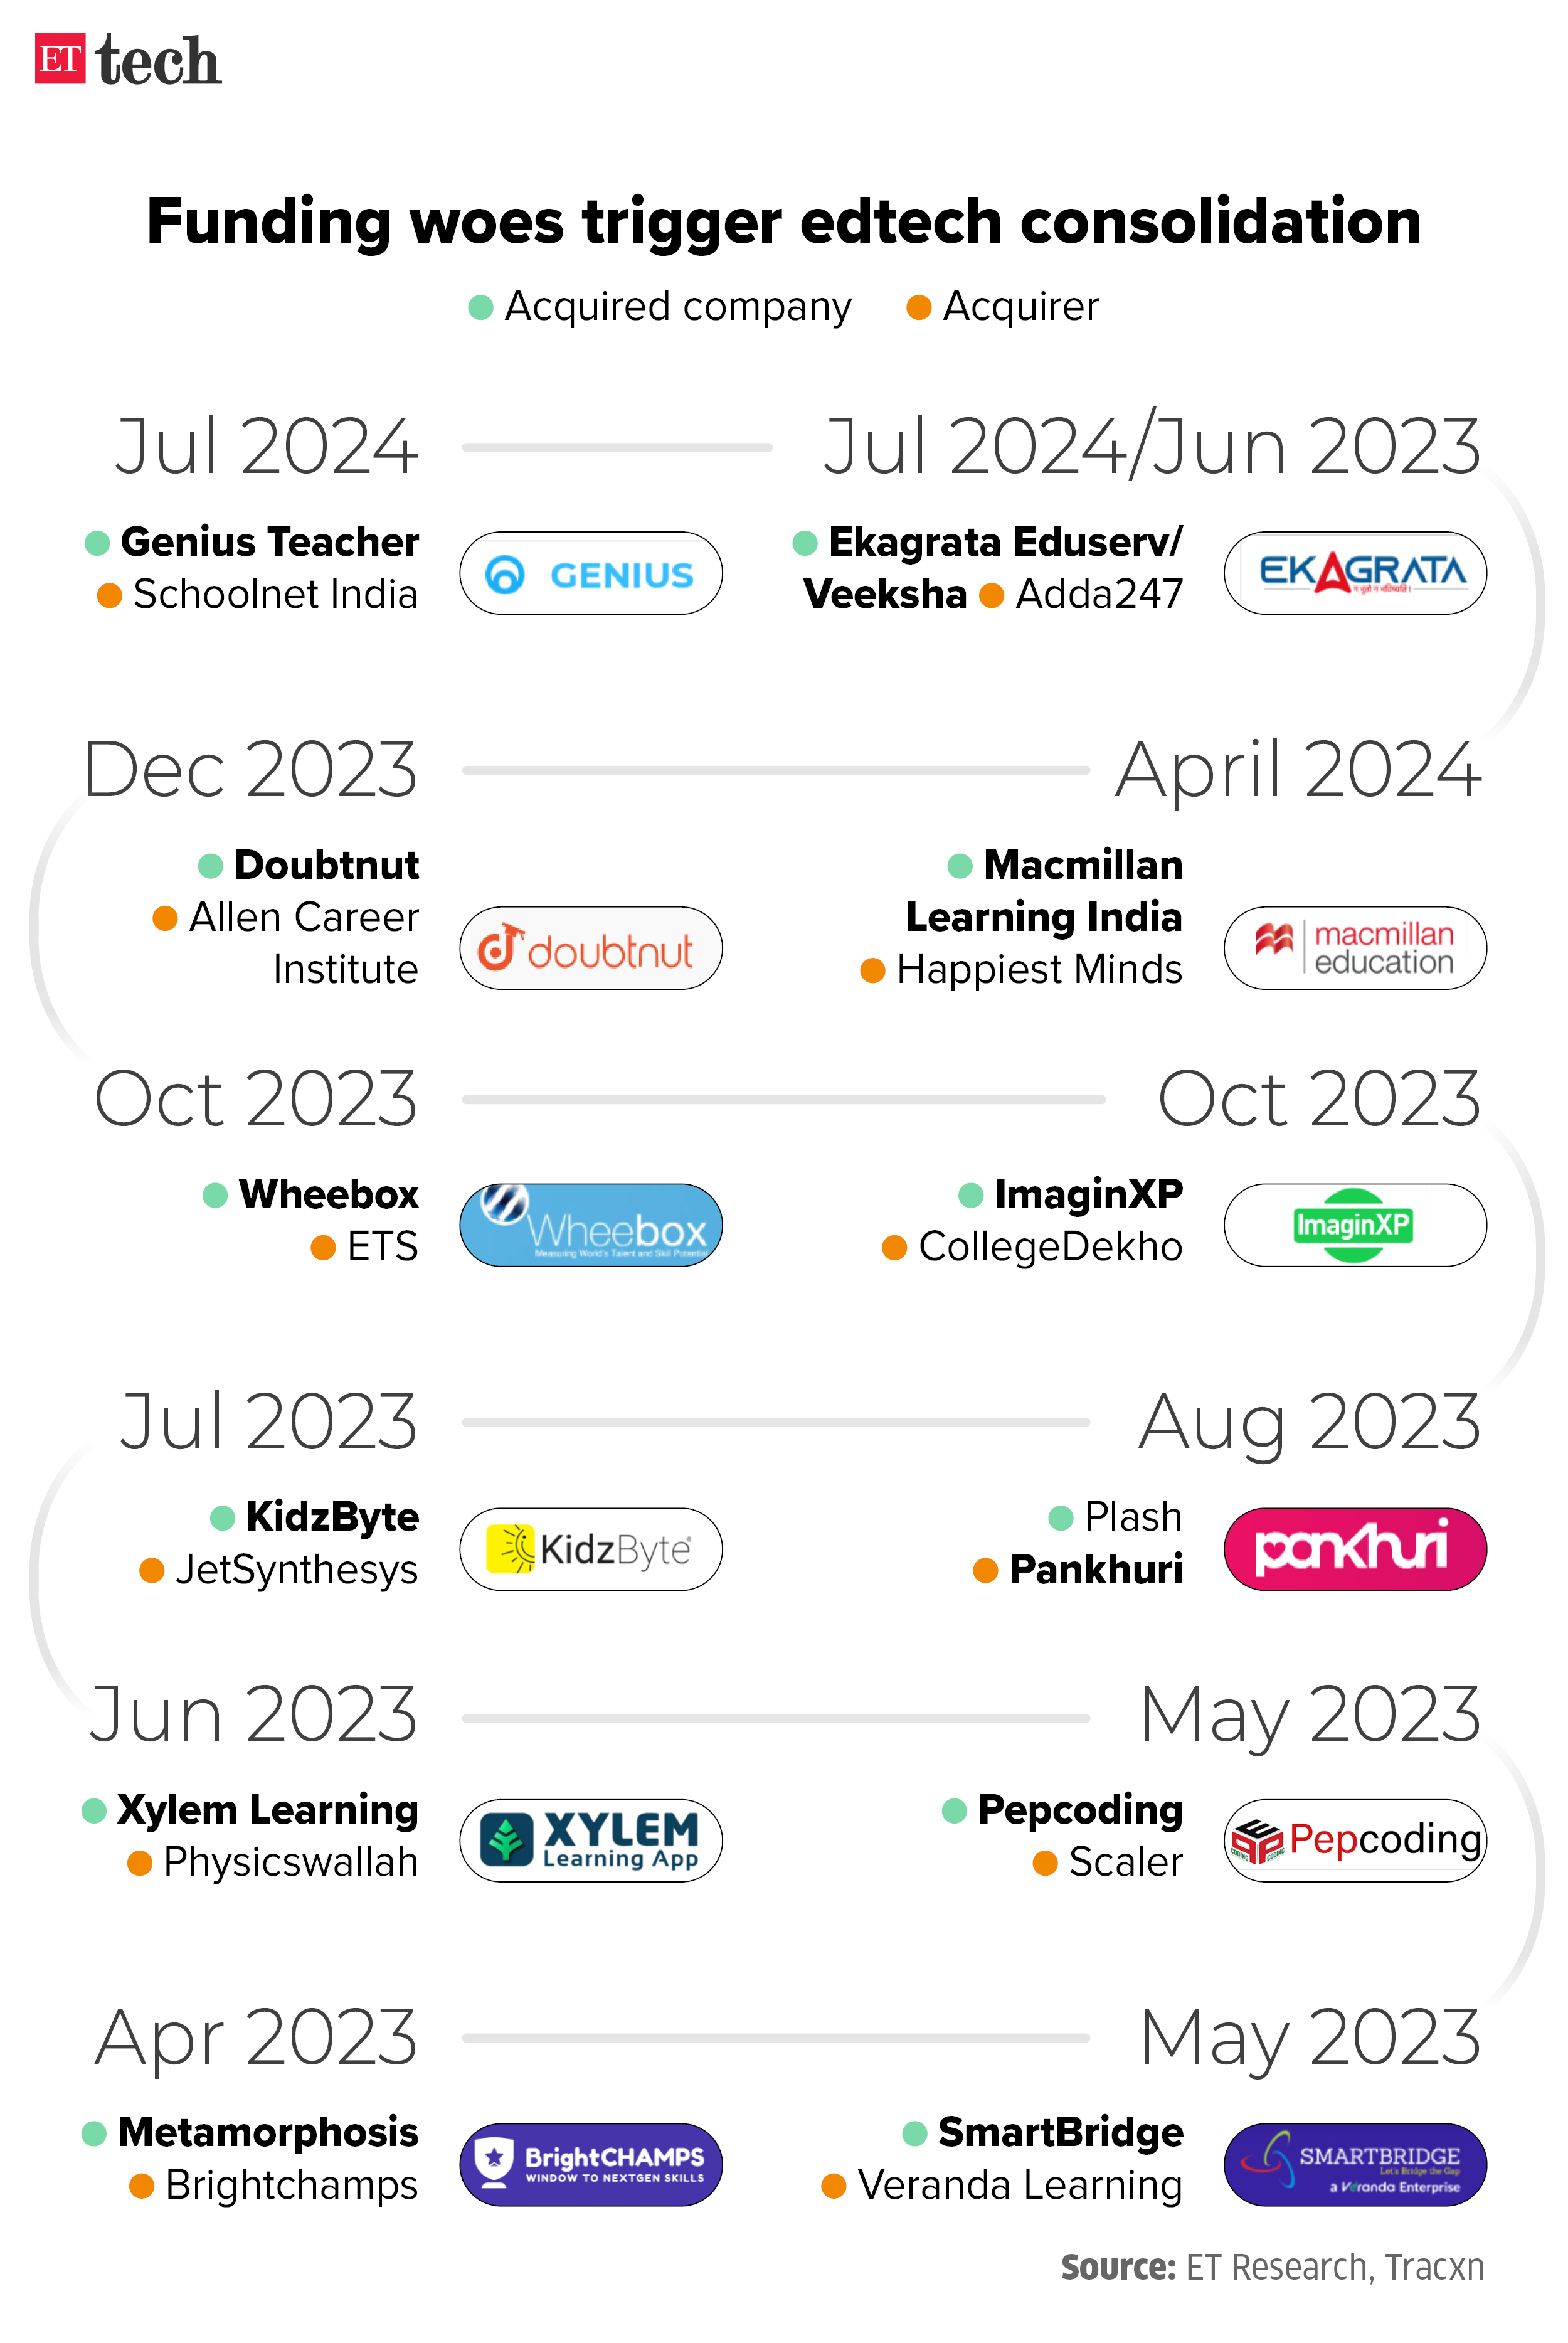 Funding woes trigger edtech consolidation_July 2024_Graphic_ETTECH